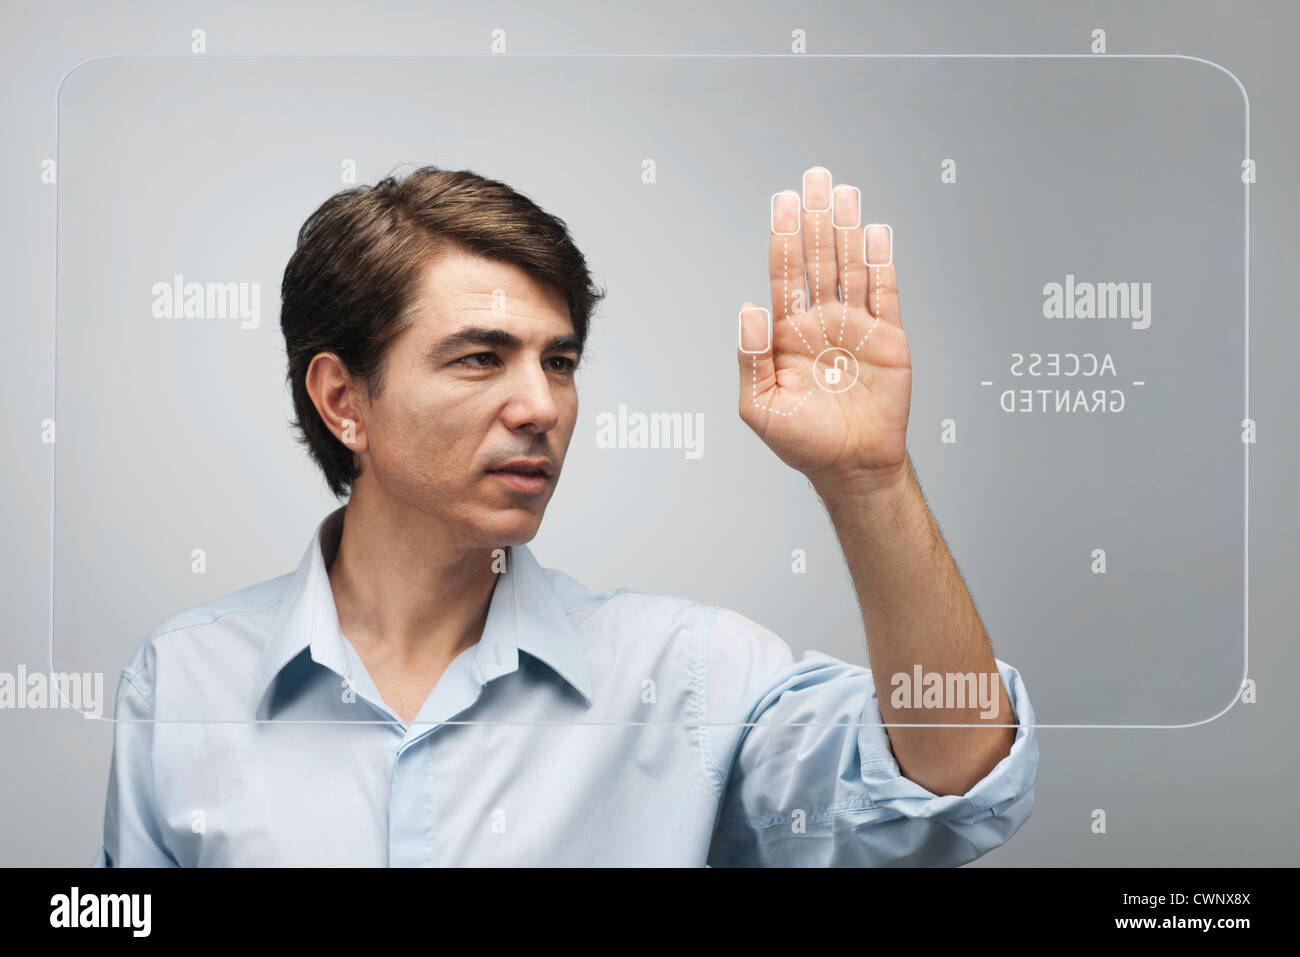 Man gaining access on touch screen interface using biometrics system Stock Photo